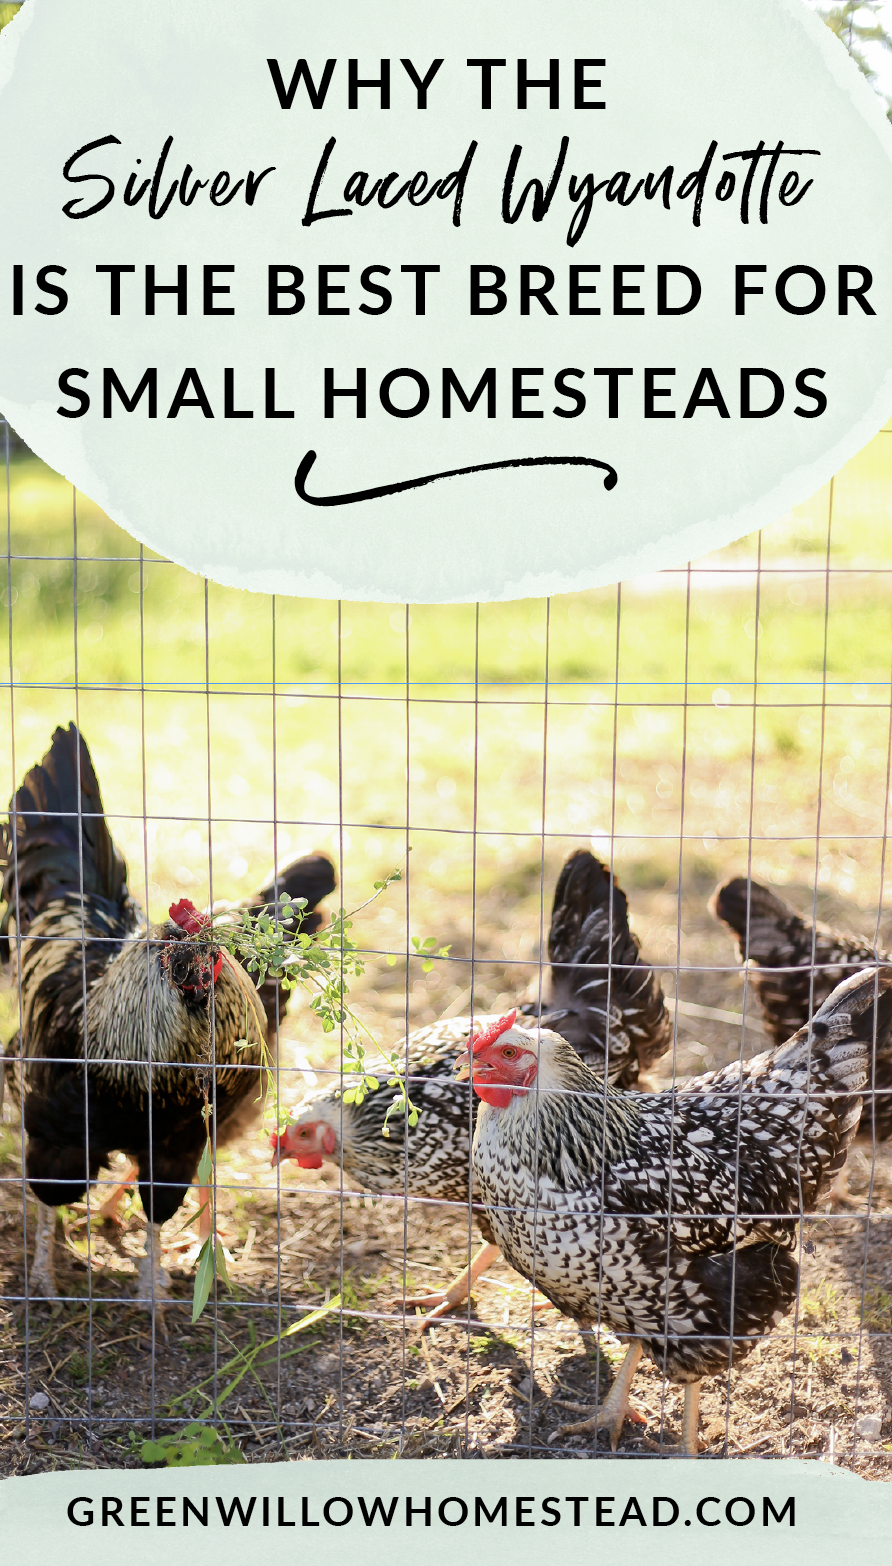 Why the silver laced Wyandotte chicken breed is the best for small homesteads